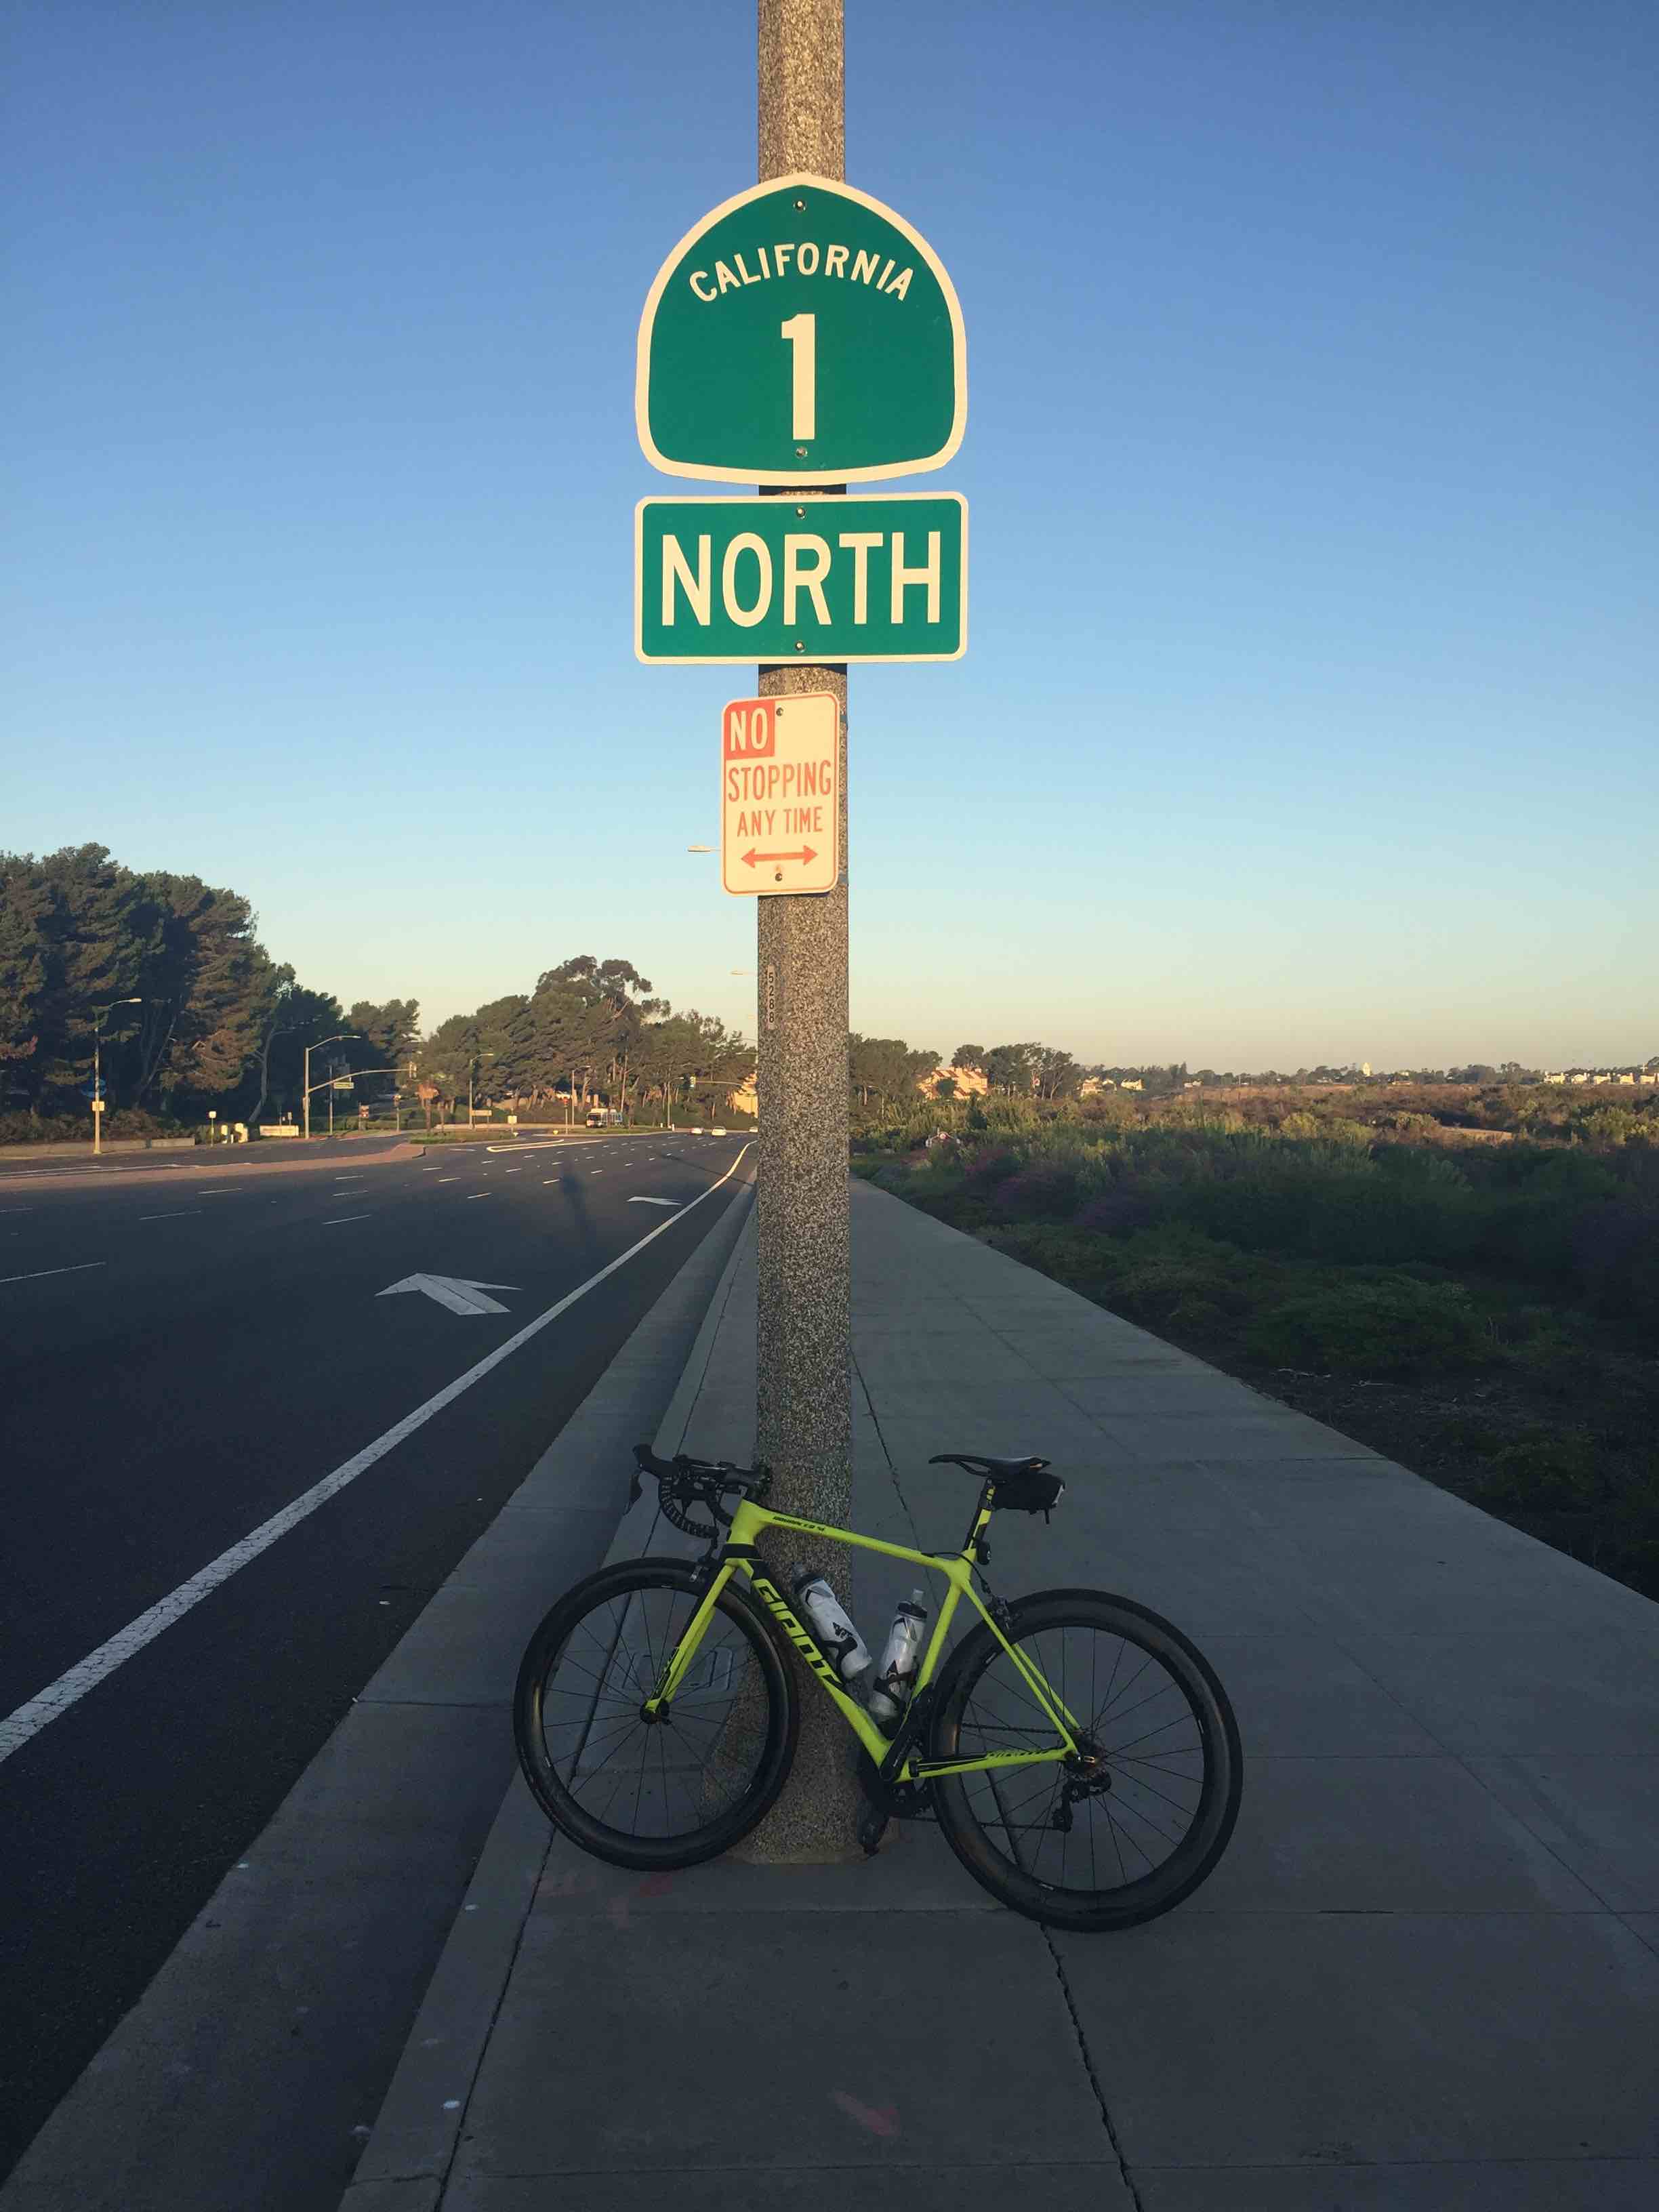 Giant TCR bicycle leaning against light pole along Coast Highway in Newport Beach, California